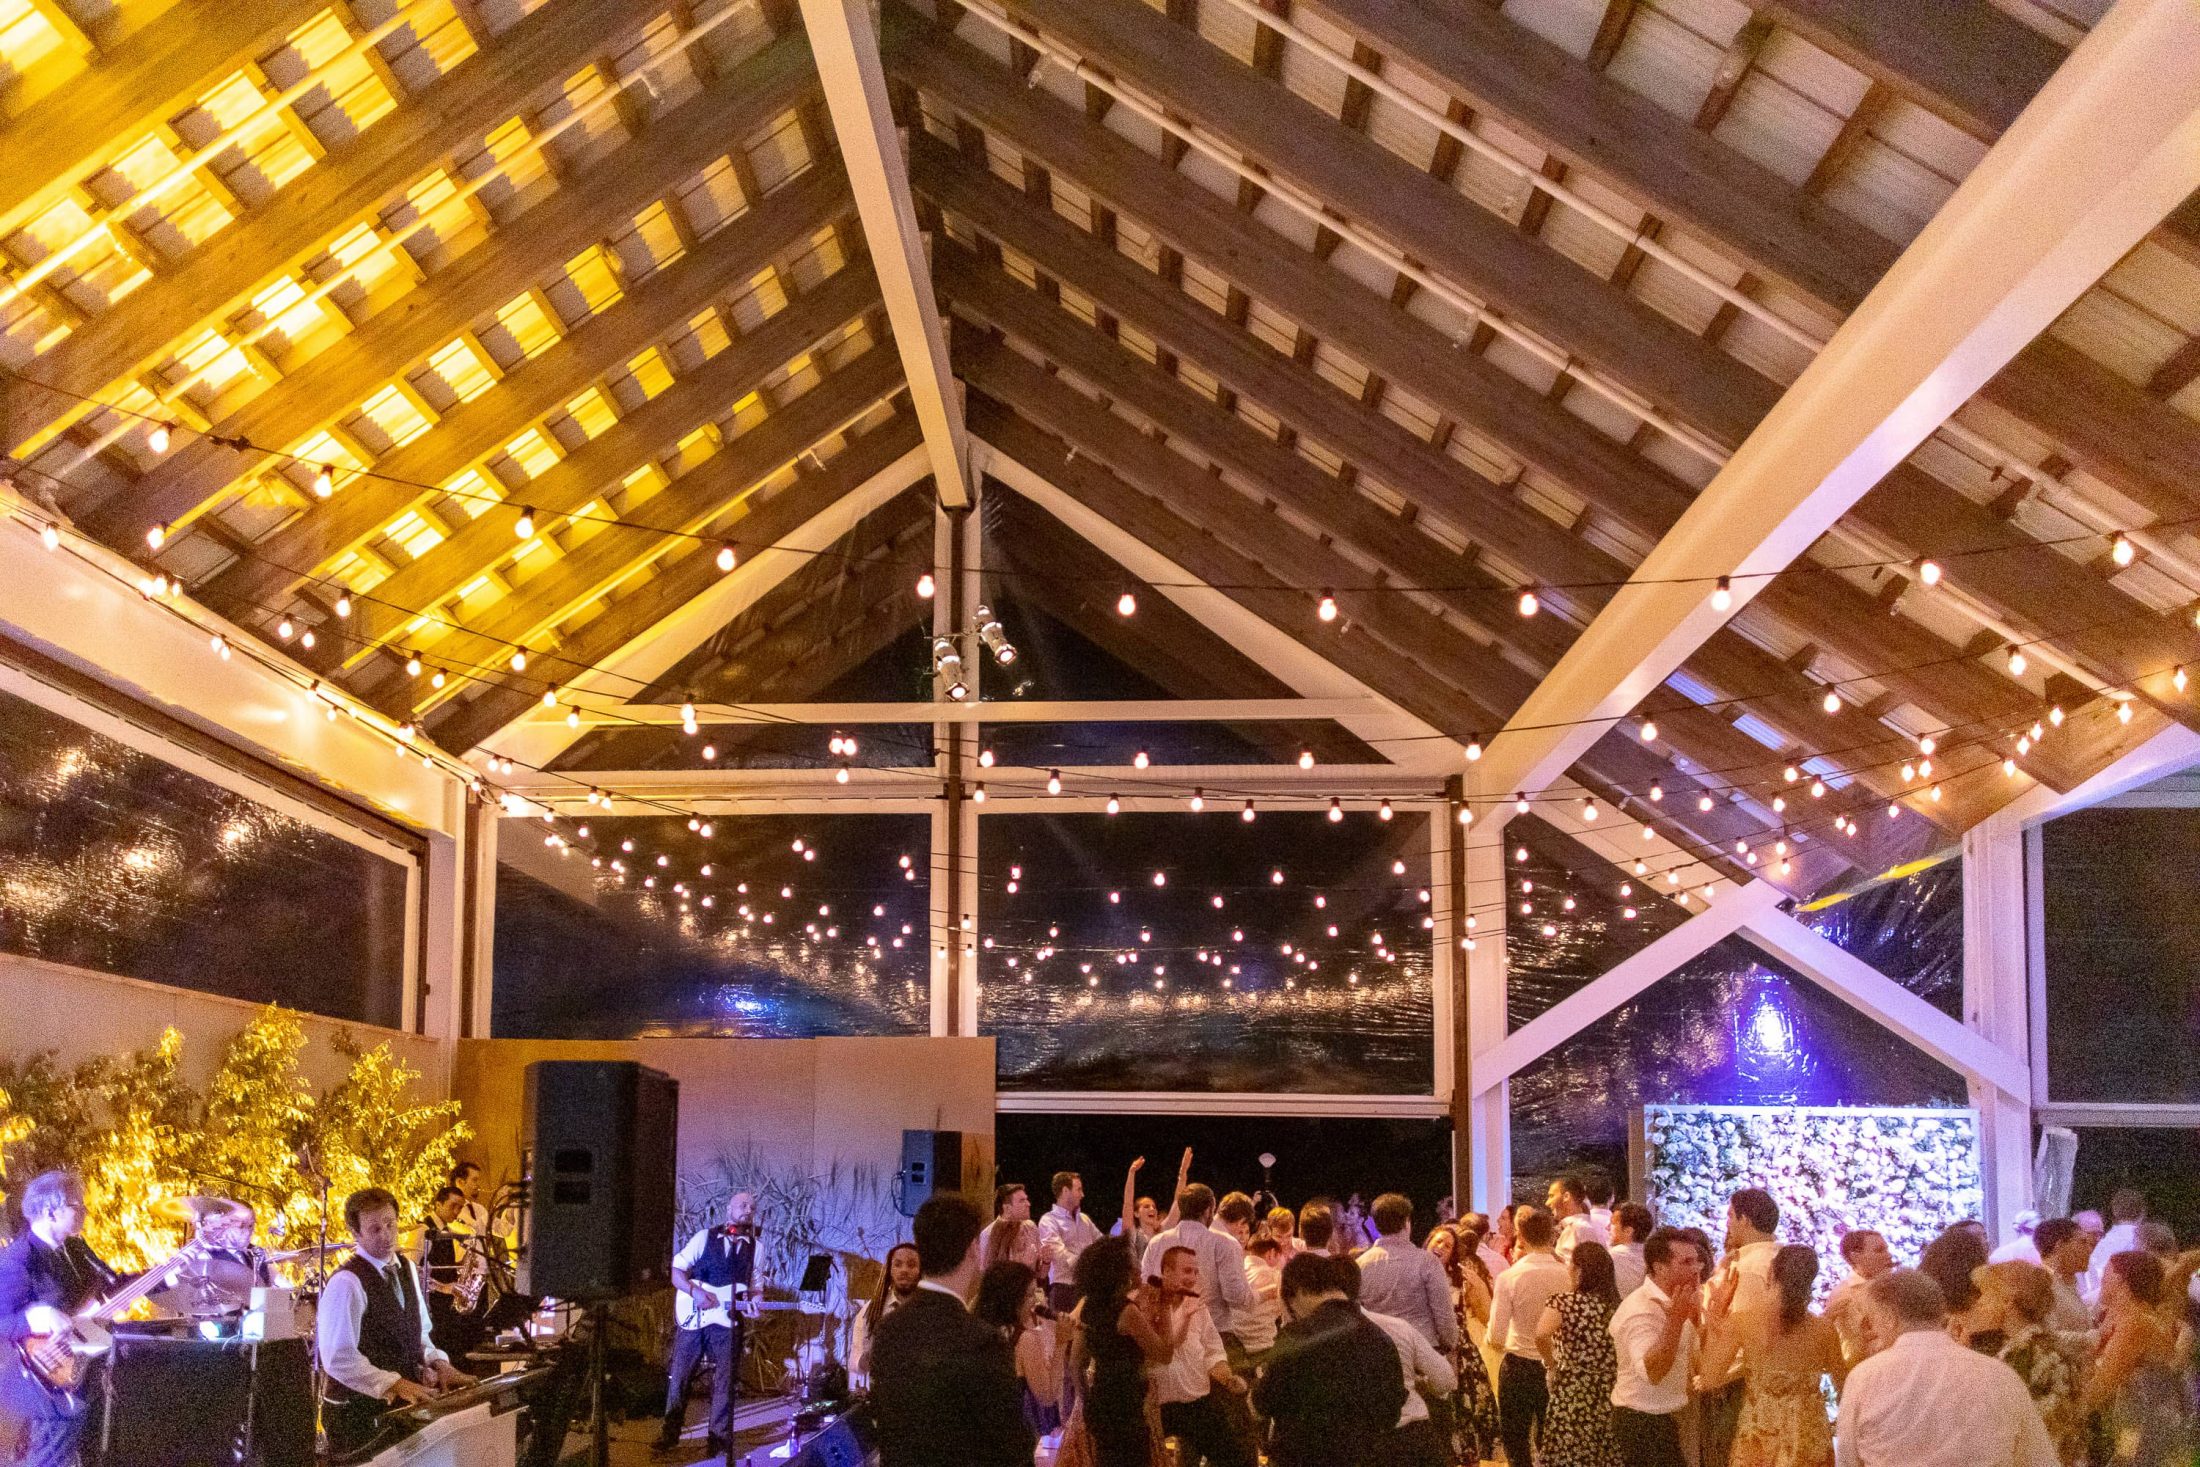 Dancing during reception at this Hamptons wedding weekend held at The Parrish Museum | Photo by Roey Yohai Studio